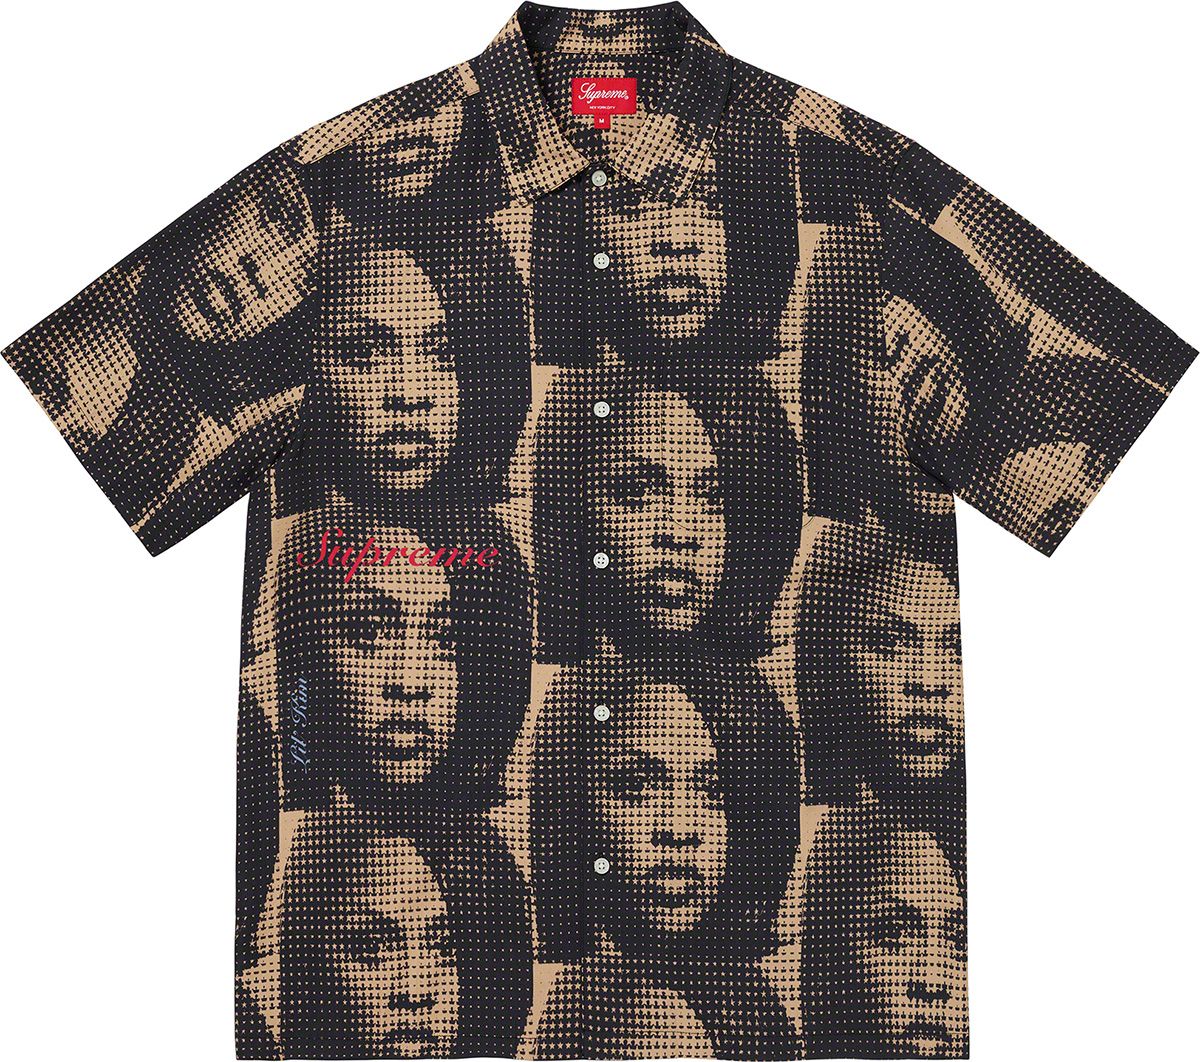 Lil Kim S/S Shirt - Spring/Summer 2022 Preview – Supreme